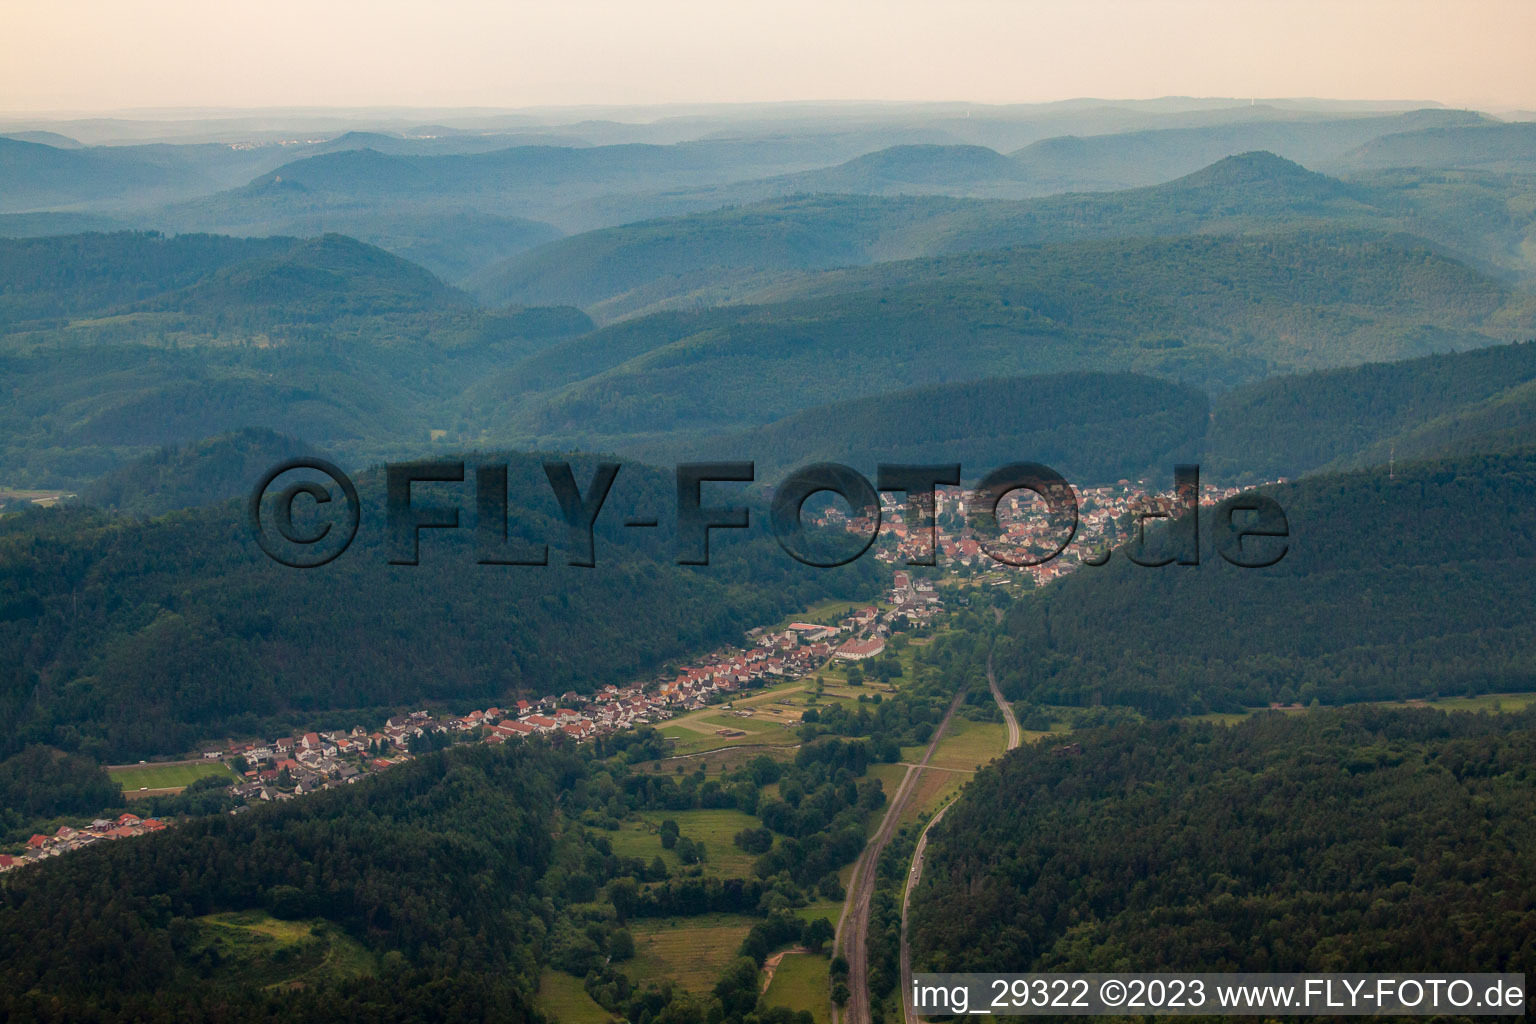 Hinterweidenthal in the state Rhineland-Palatinate, Germany from a drone